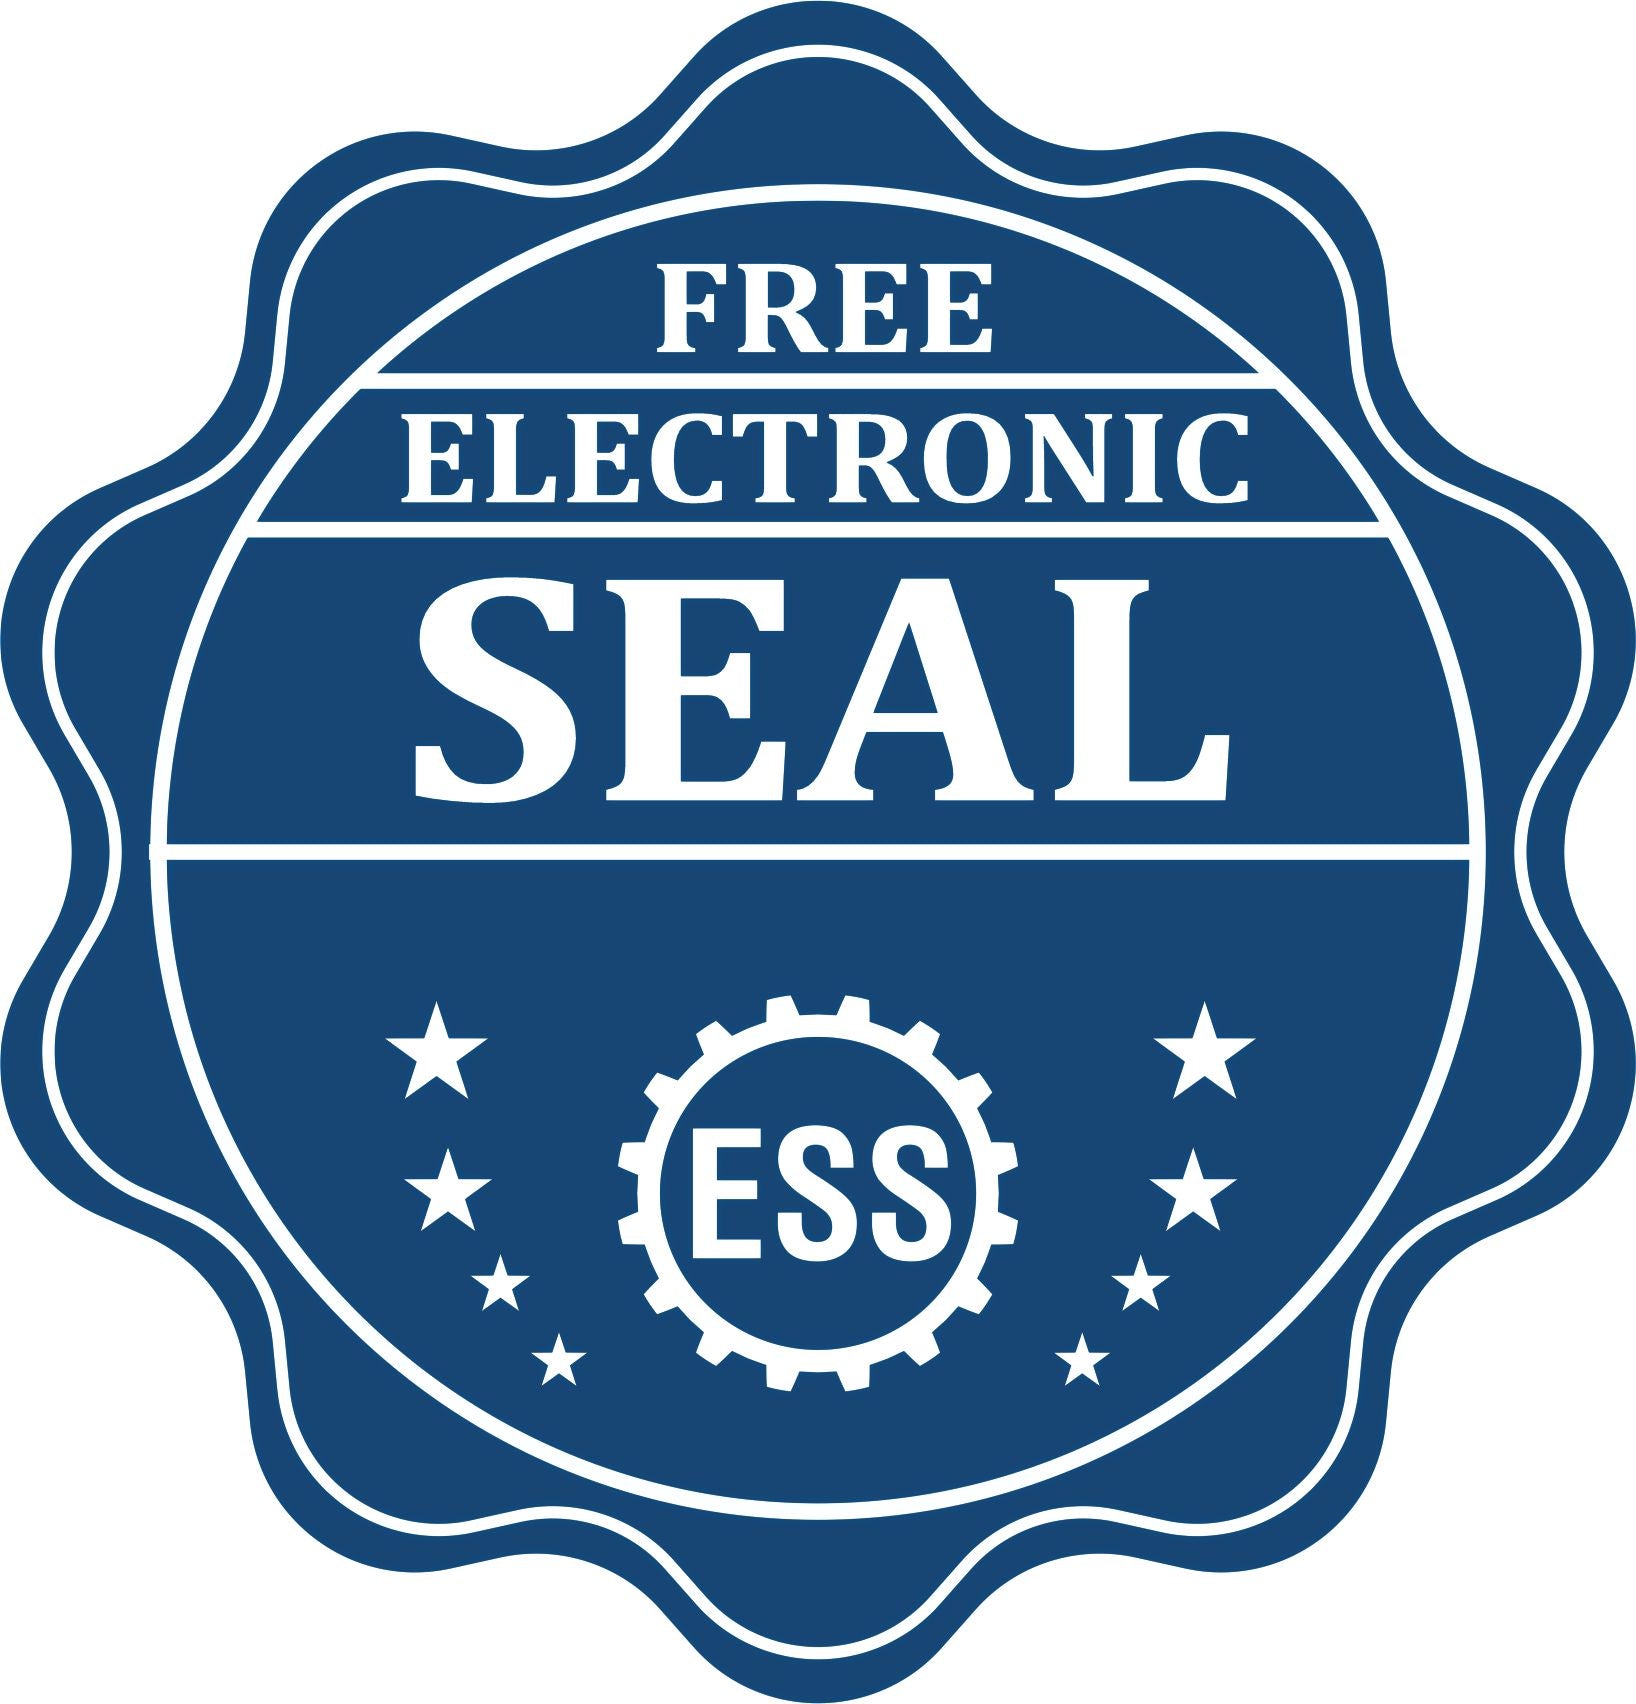 A badge showing a free electronic seal for the Premium MaxLight Pre-Inked Florida Landscape Architectural Stamp with stars and the ESS gear on the emblem.